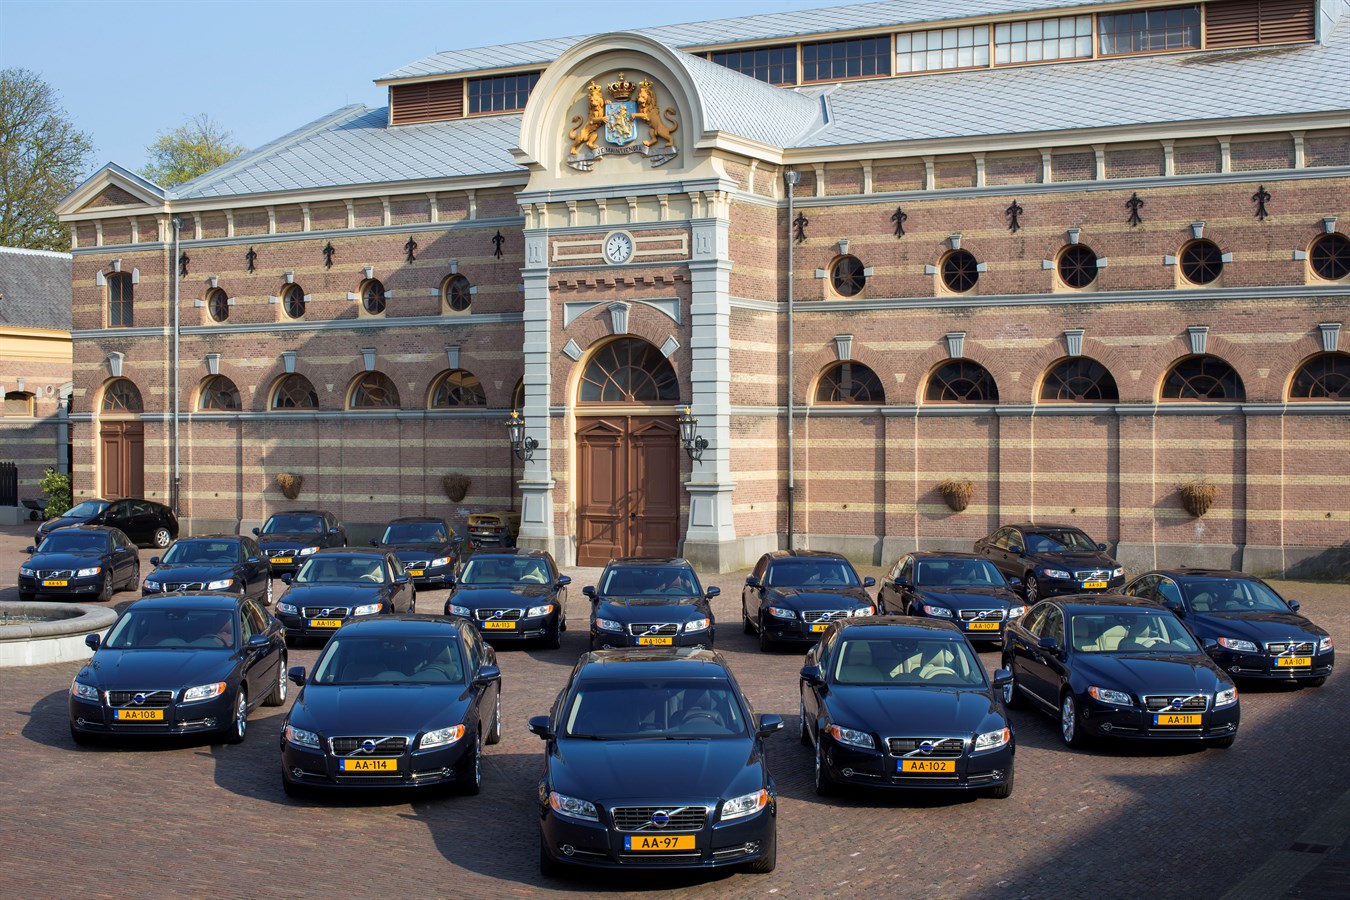 Volvos for Dutch Royal guests